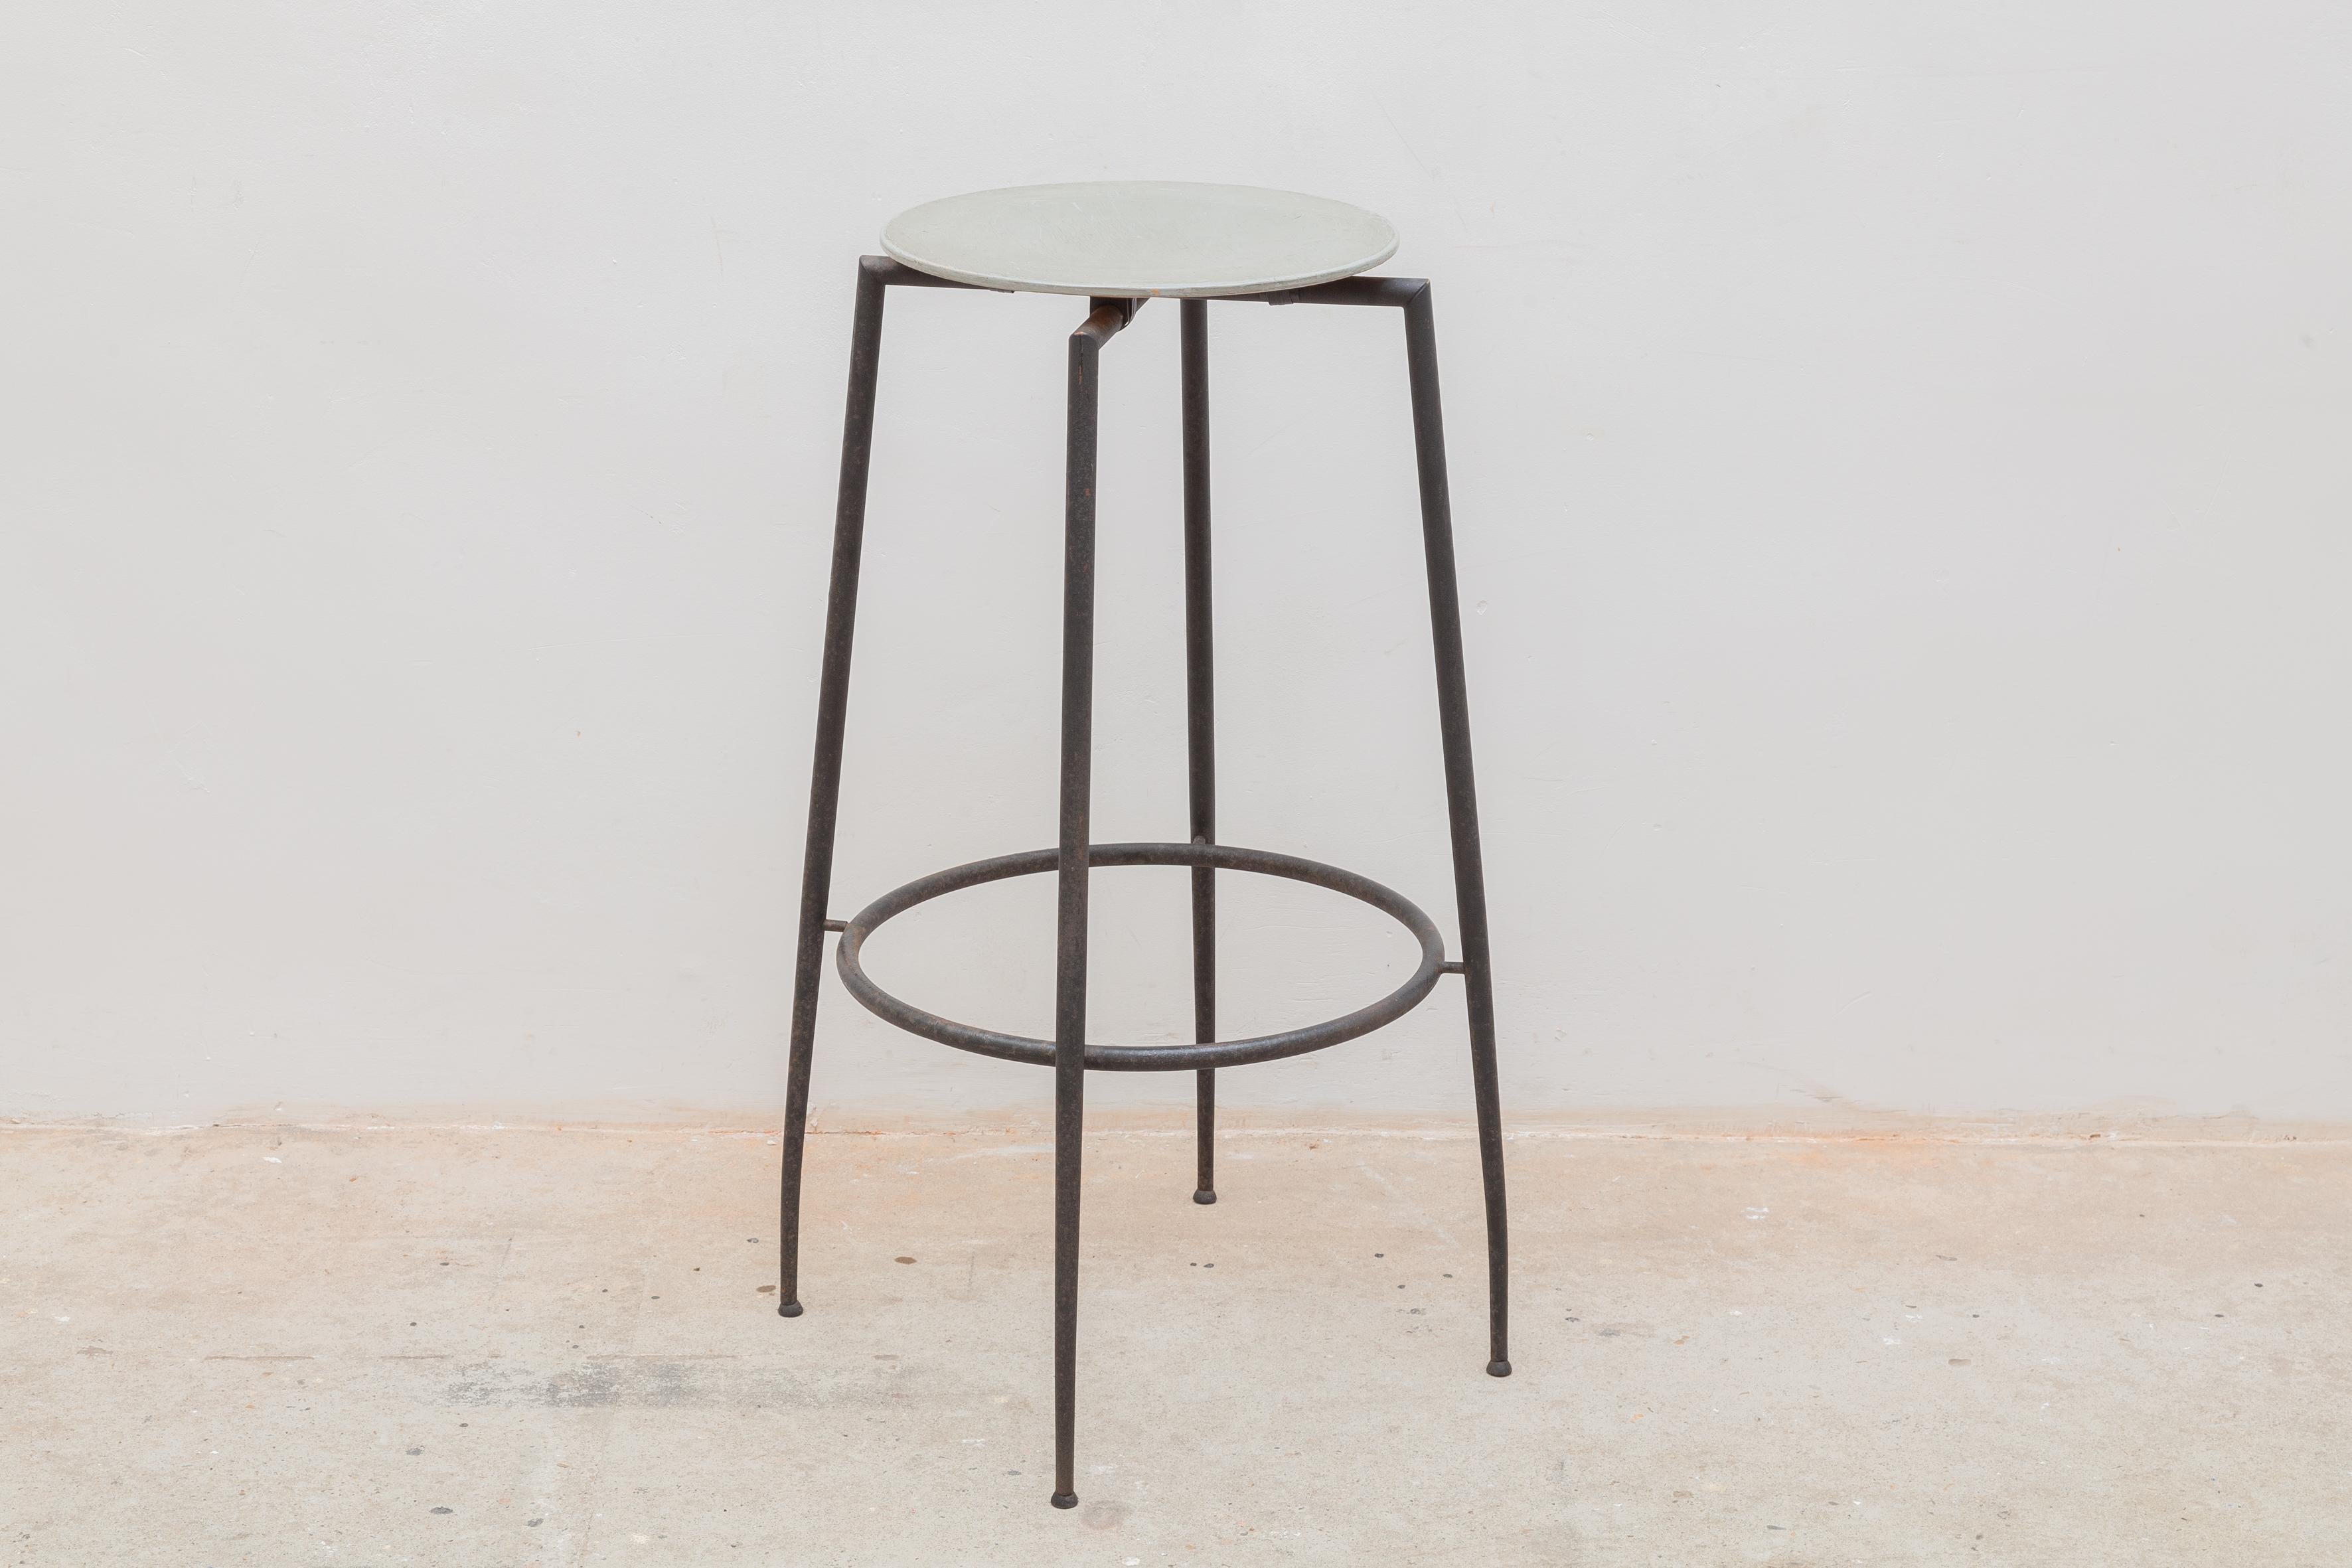 Wrought Iron Industrial Foot Stools Designed by Foraform, Norway For Sale 1